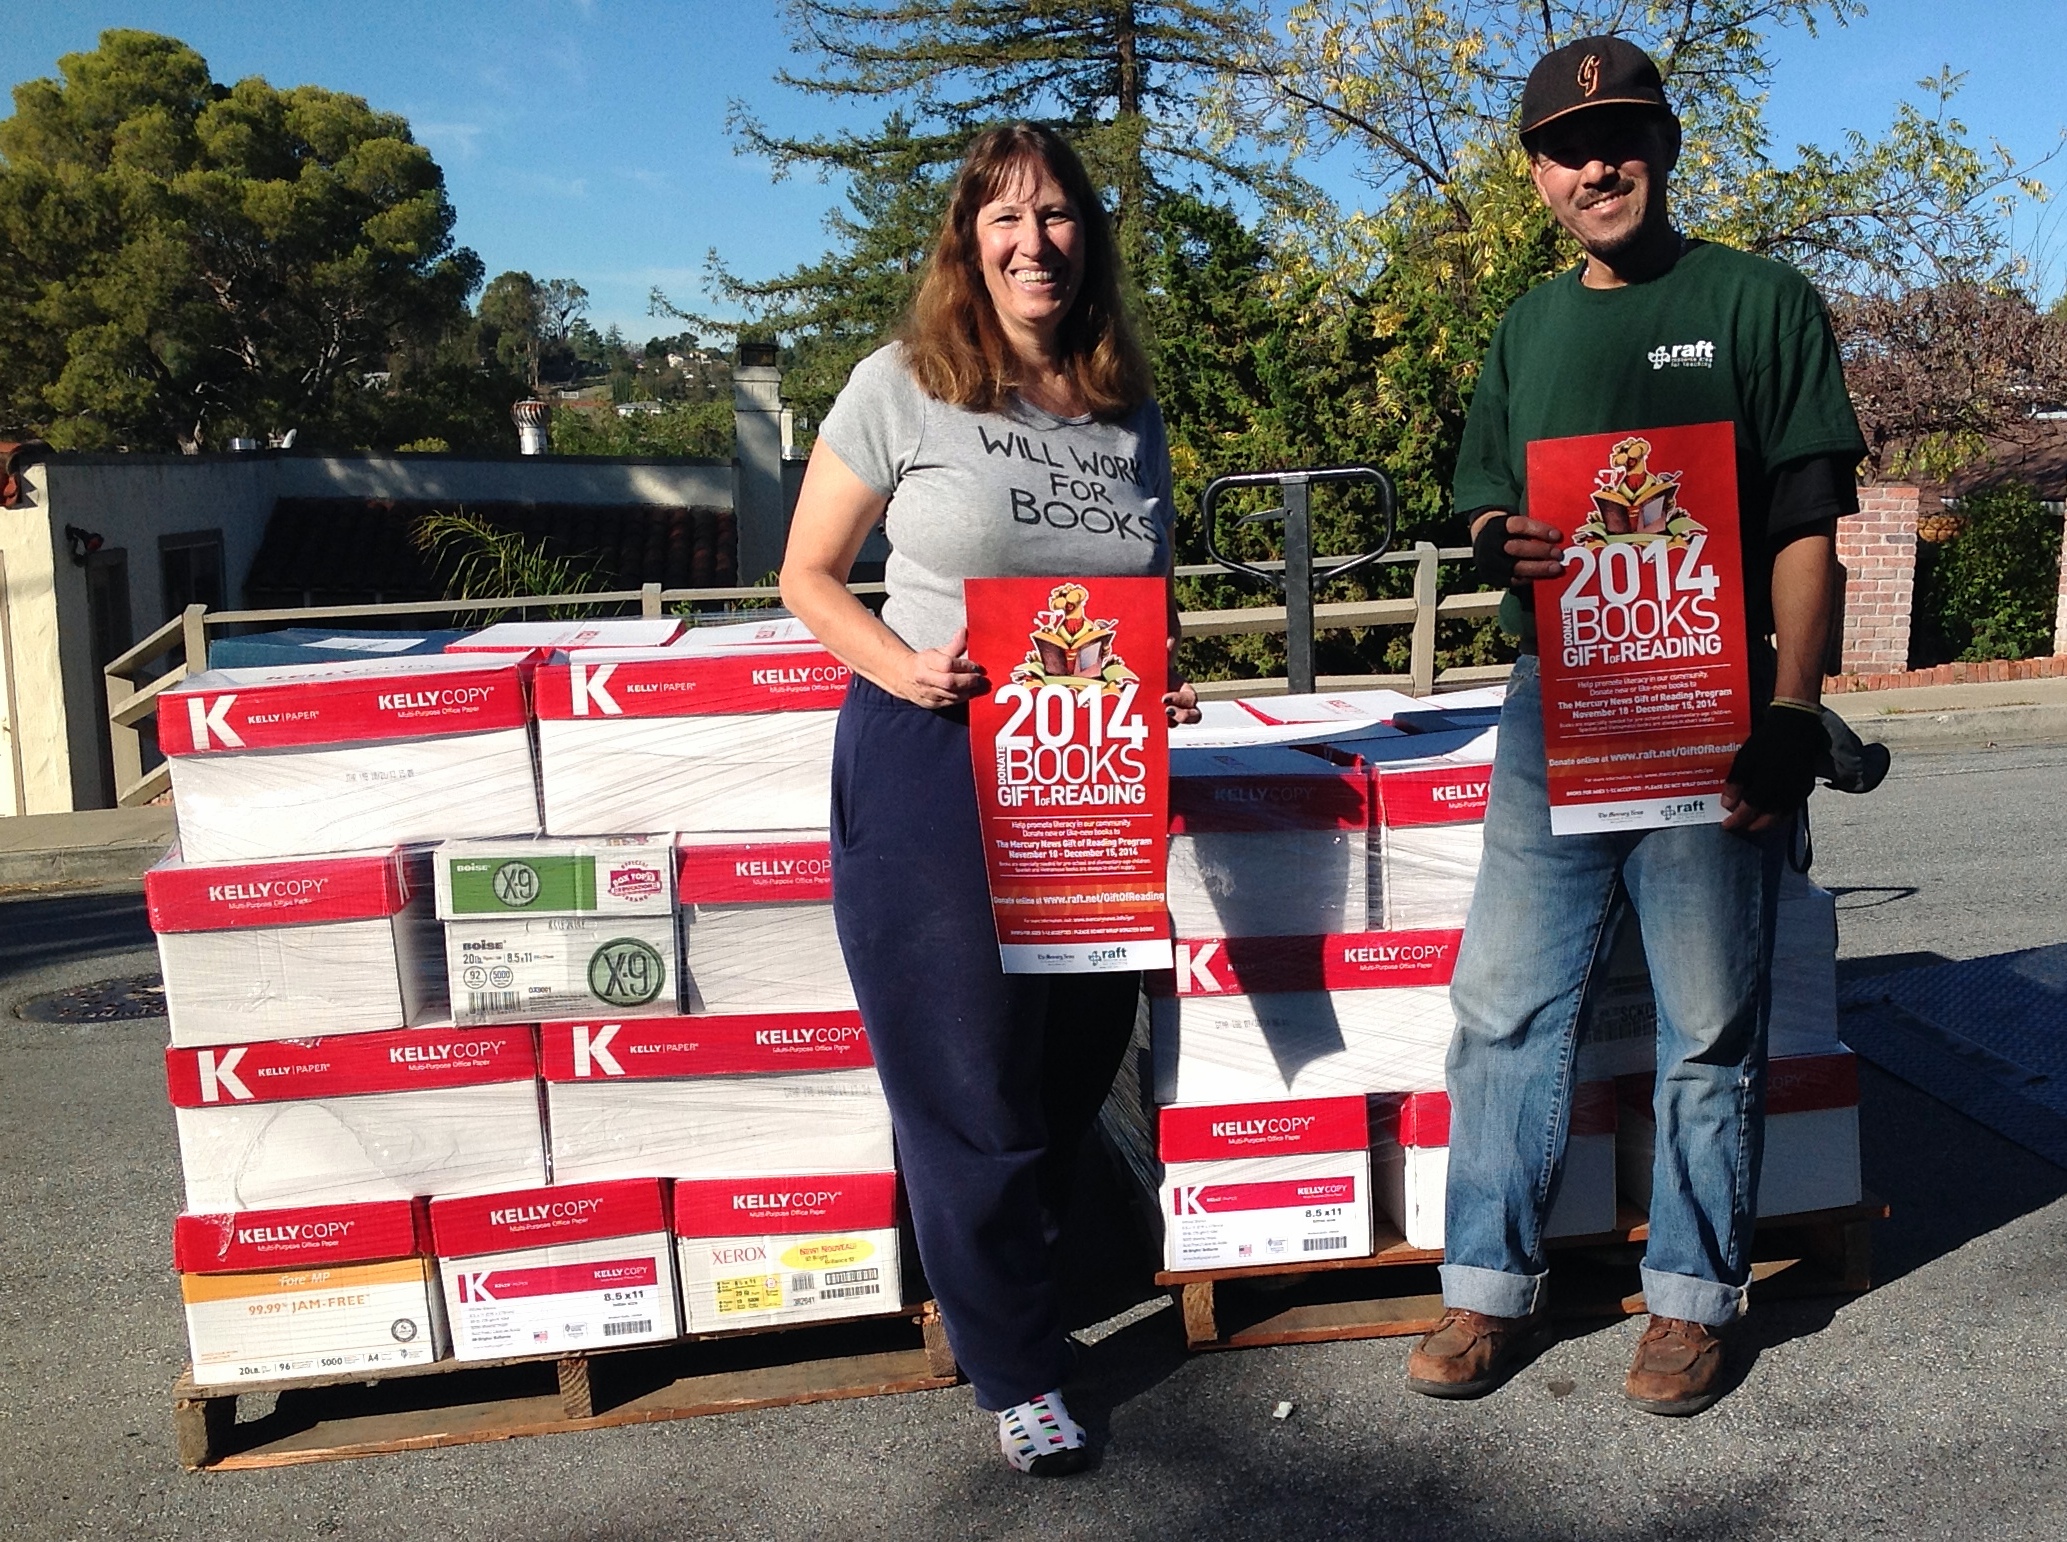 Sharon Levin from Redwood City donated thousands of books to the Gift of Reading book drive